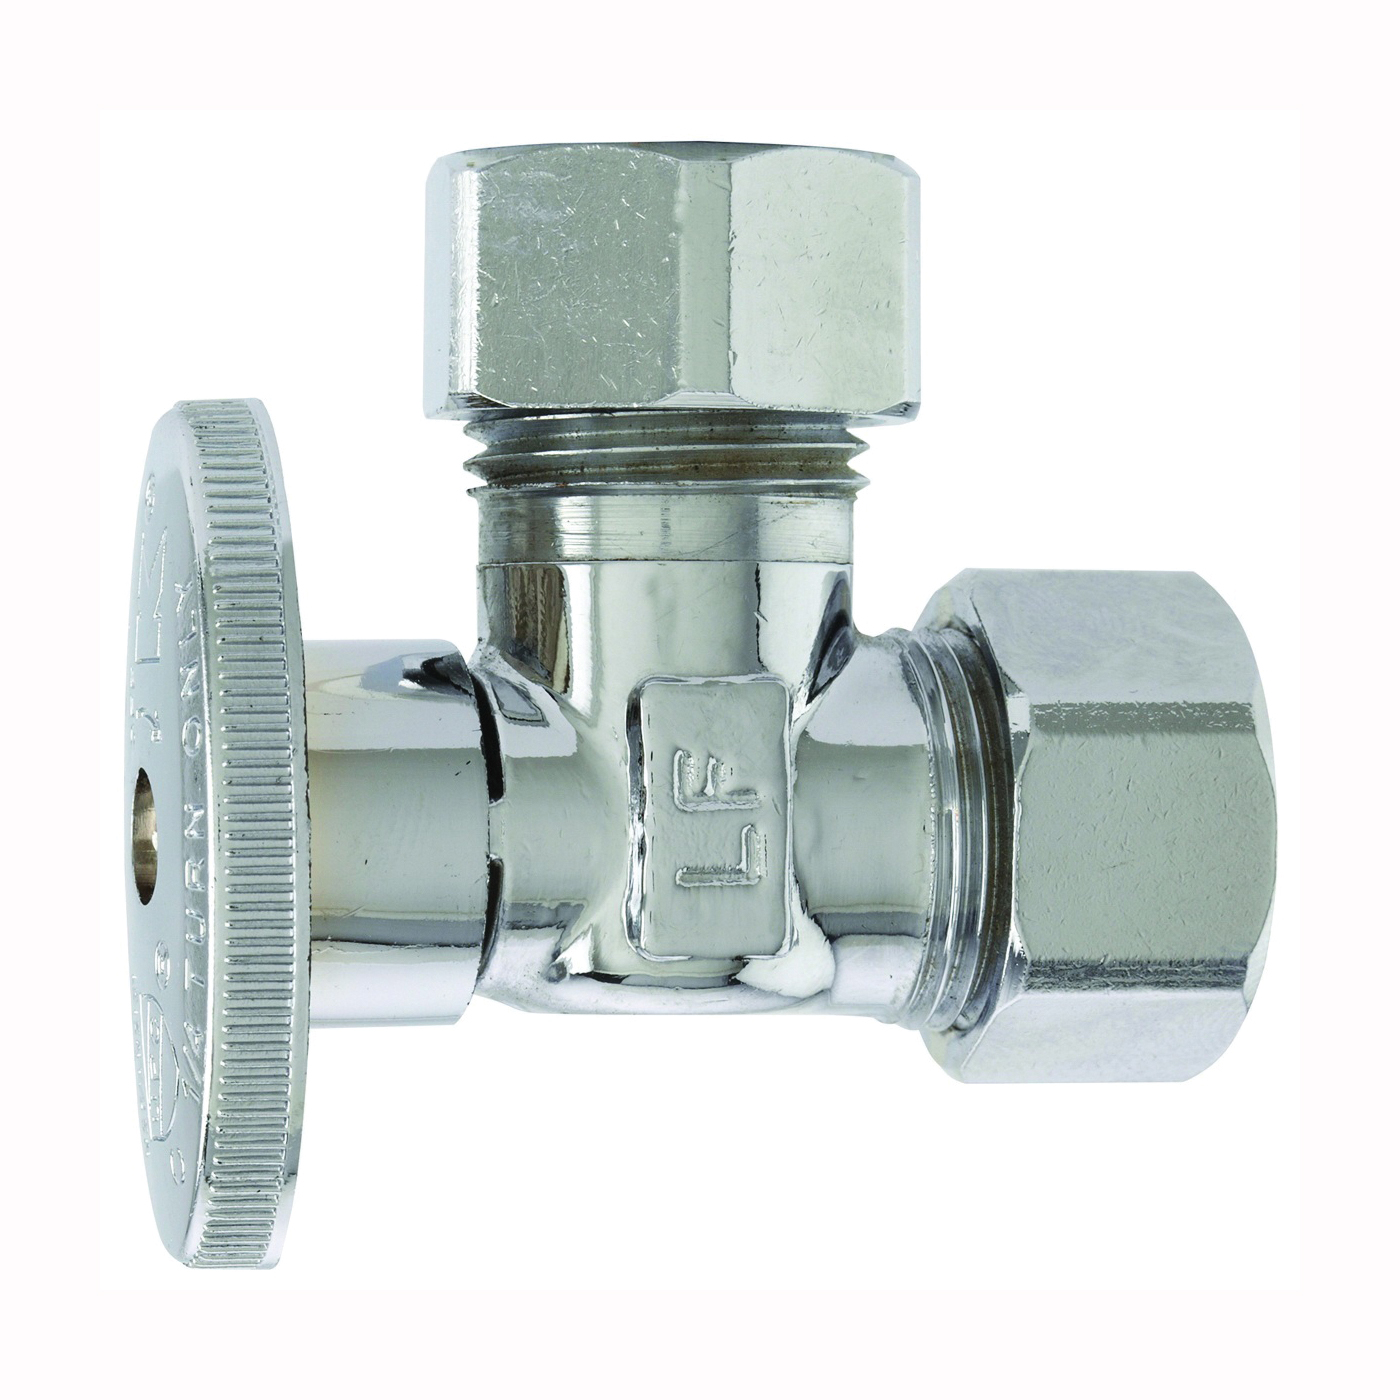 PP67PCLF Shut-Off Valve, 5/8 x 7/16 in Connection, Compression, Brass Body